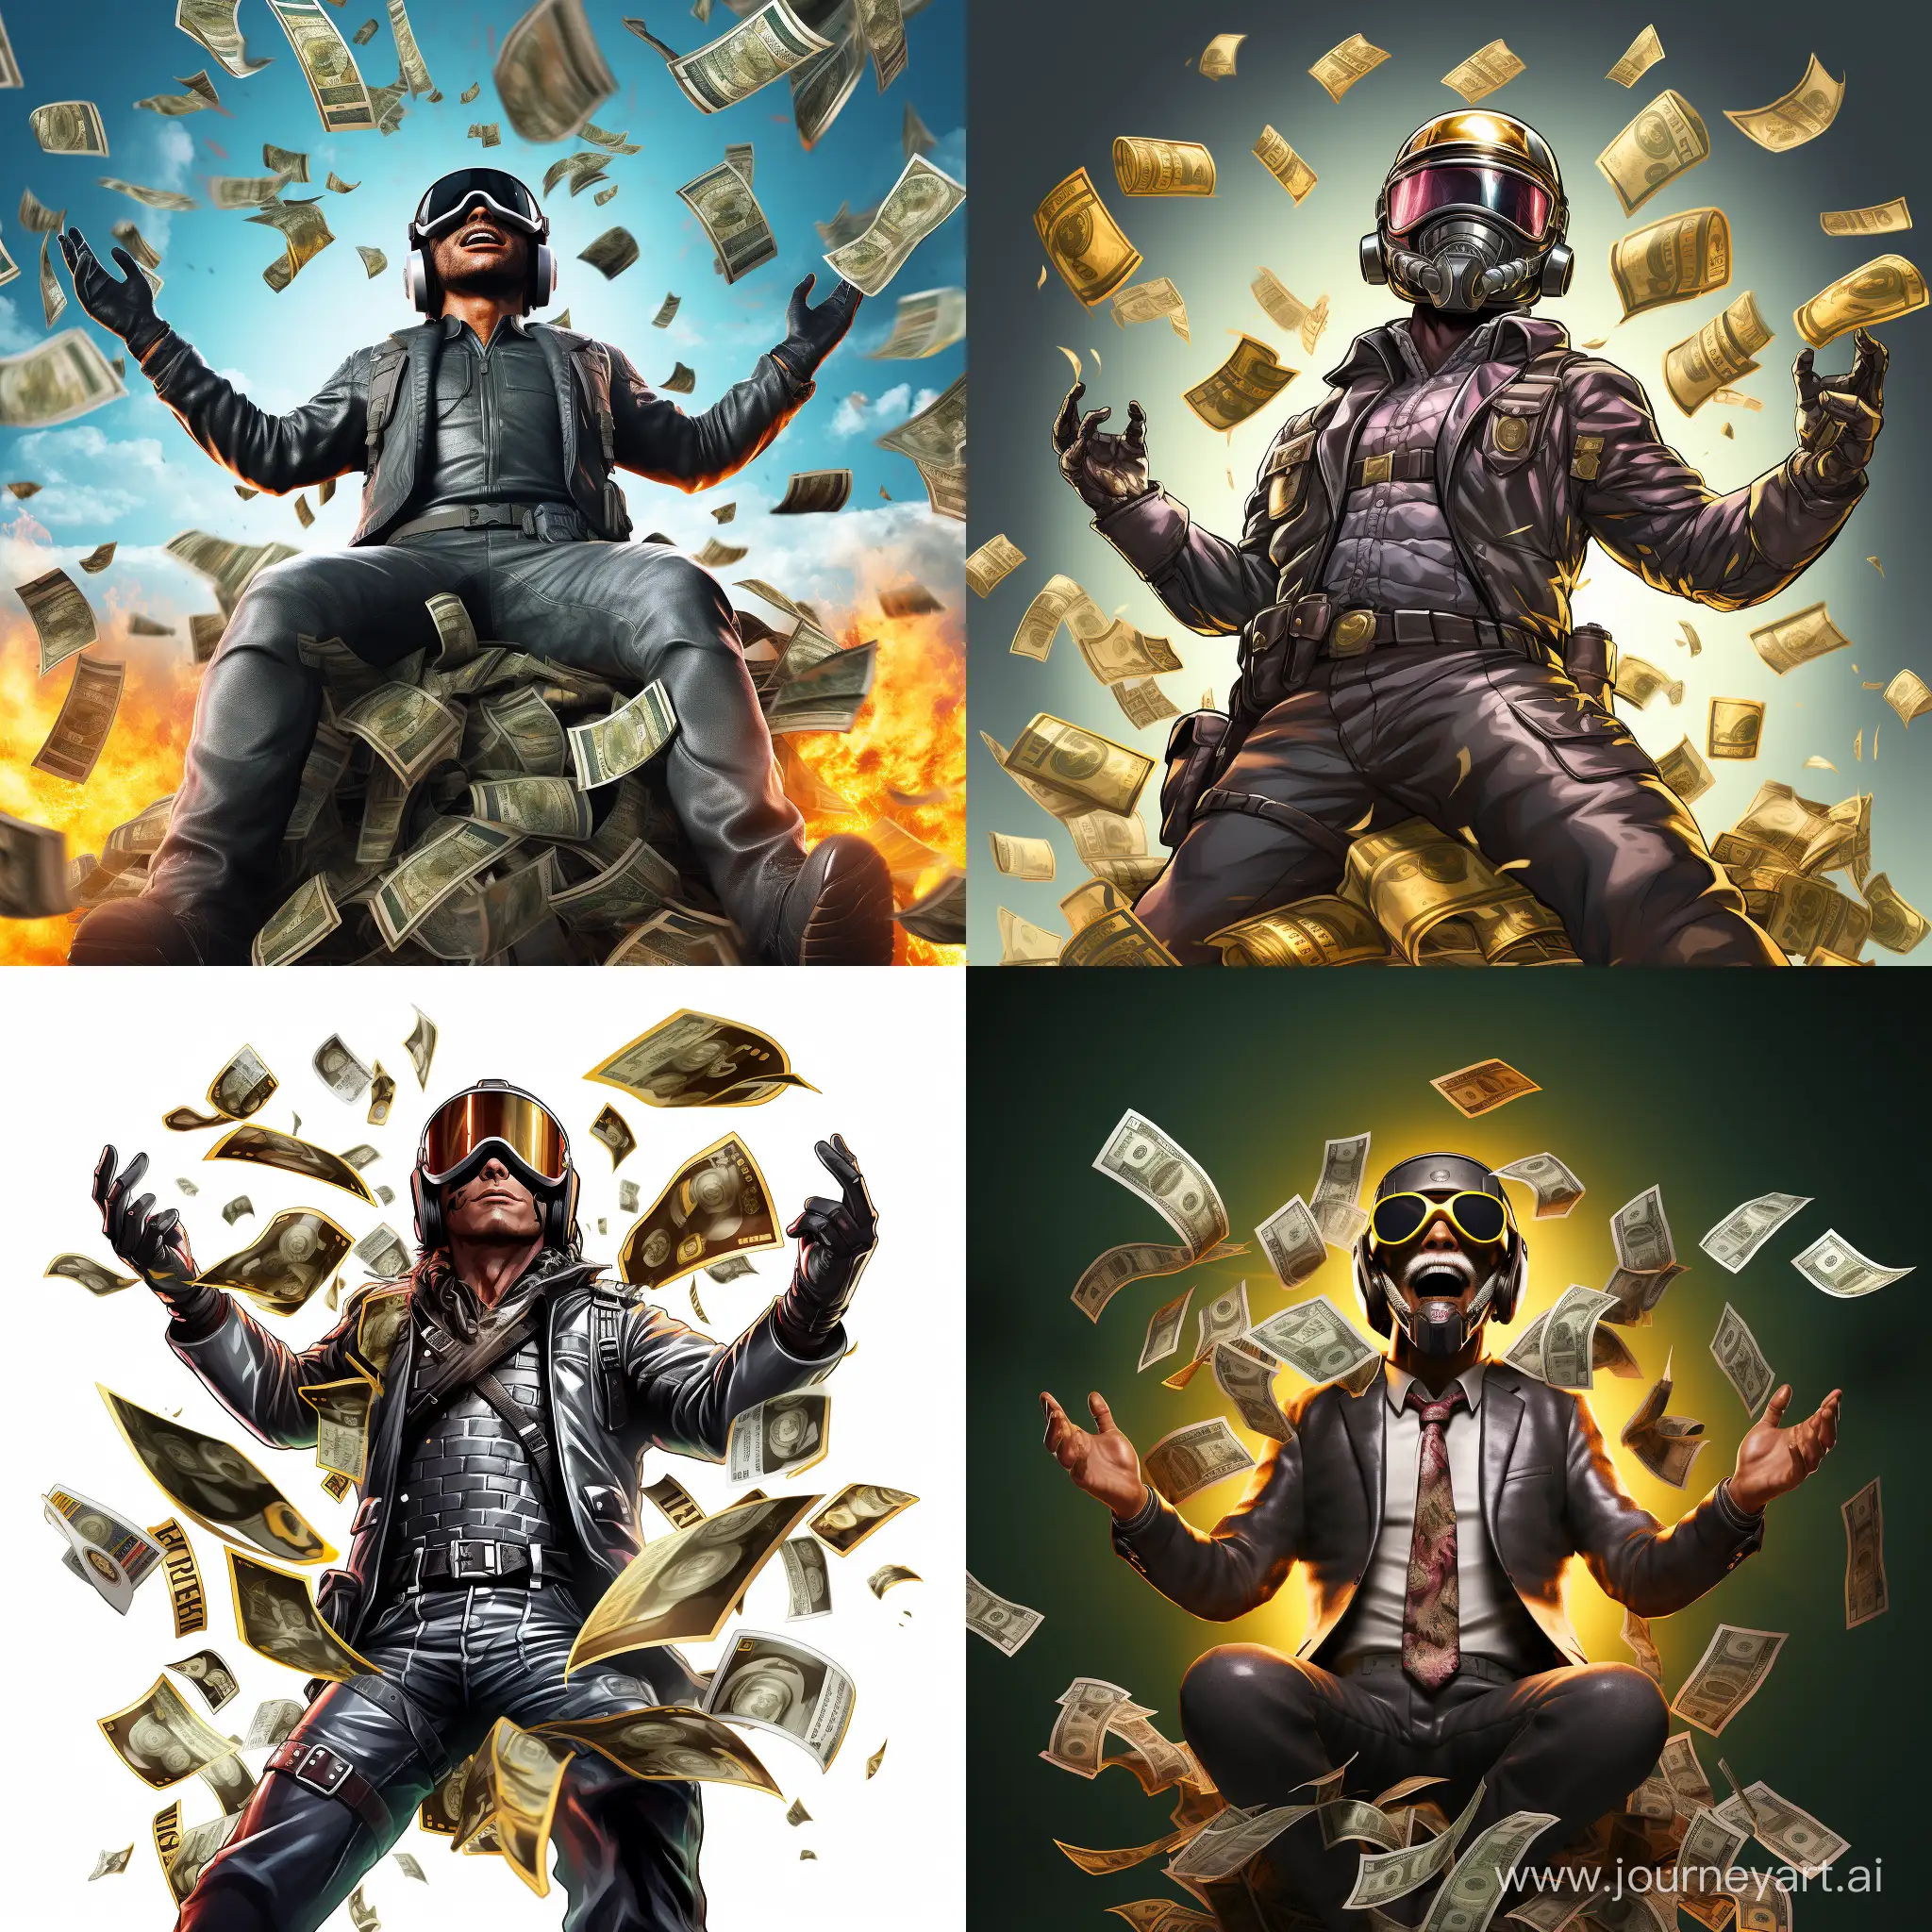 Create an image in which a character in a level 3 body armor and helmet from the game Pubg Mobile stands with a happy face and throws the game currency Unknown Cash and behind him Unknown Cash currency falls from the sky.